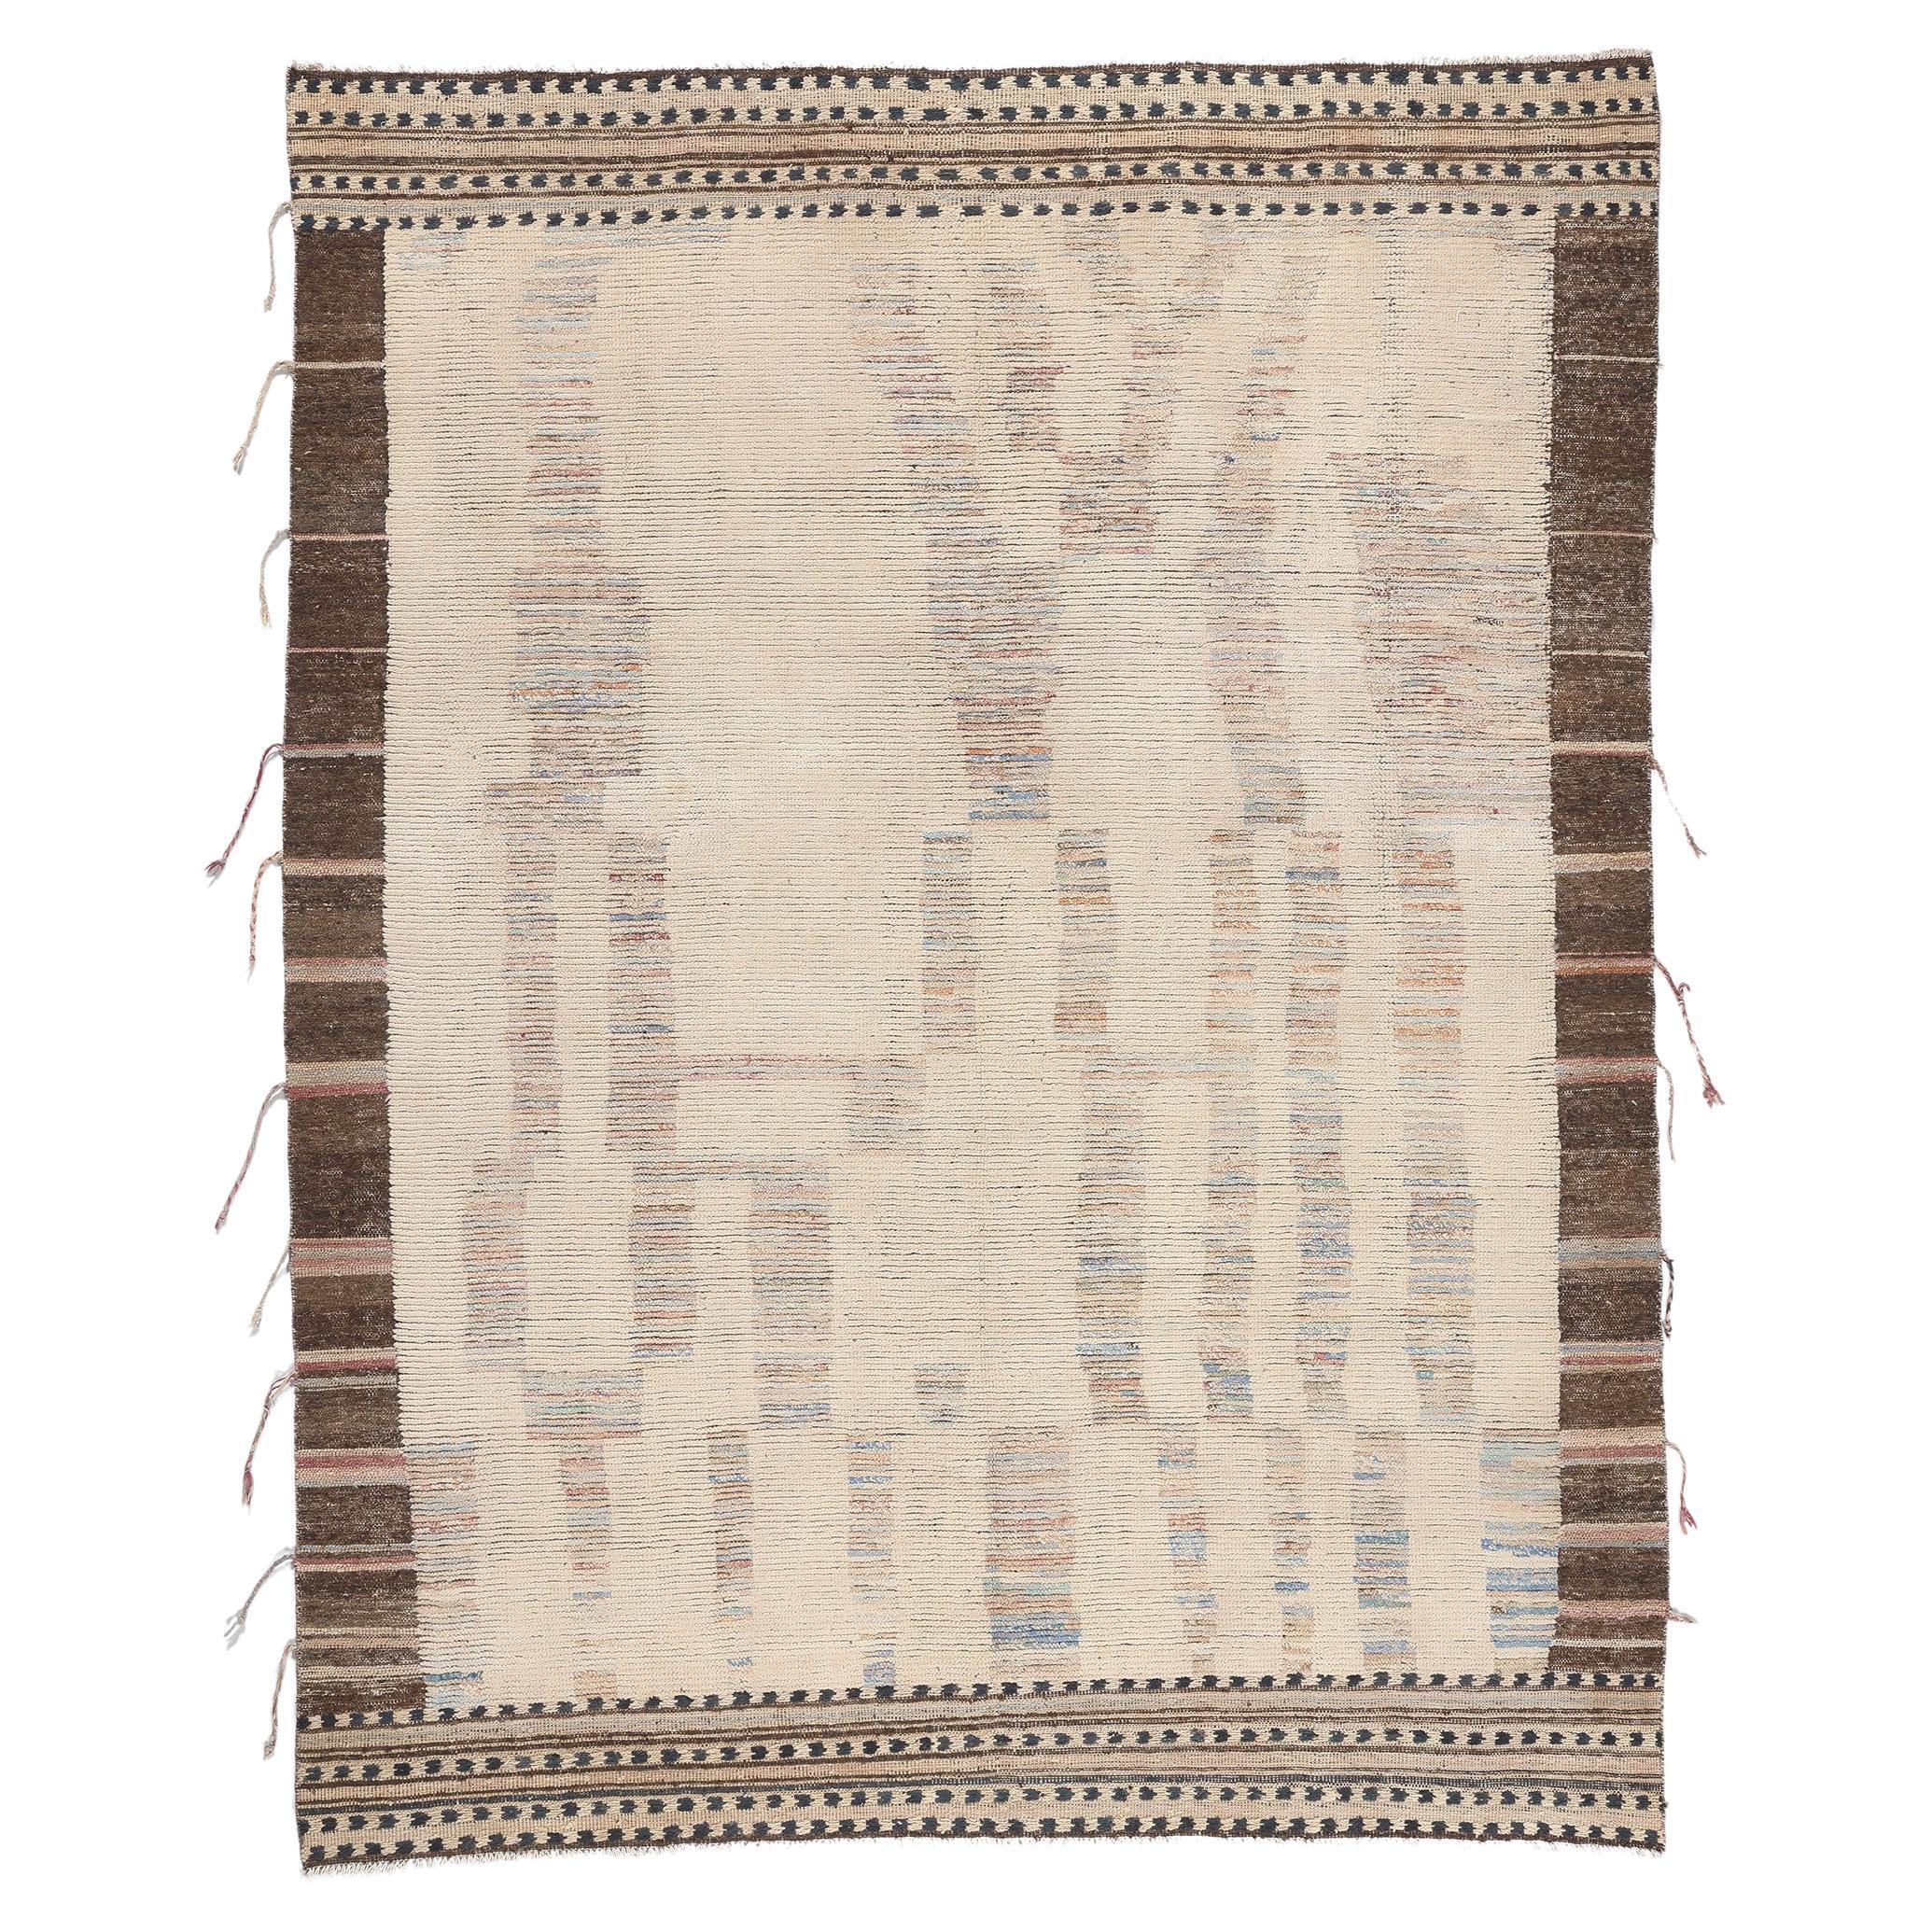 Soft Earth-Tone Modern Moroccan Area Rug with Short Pile For Sale